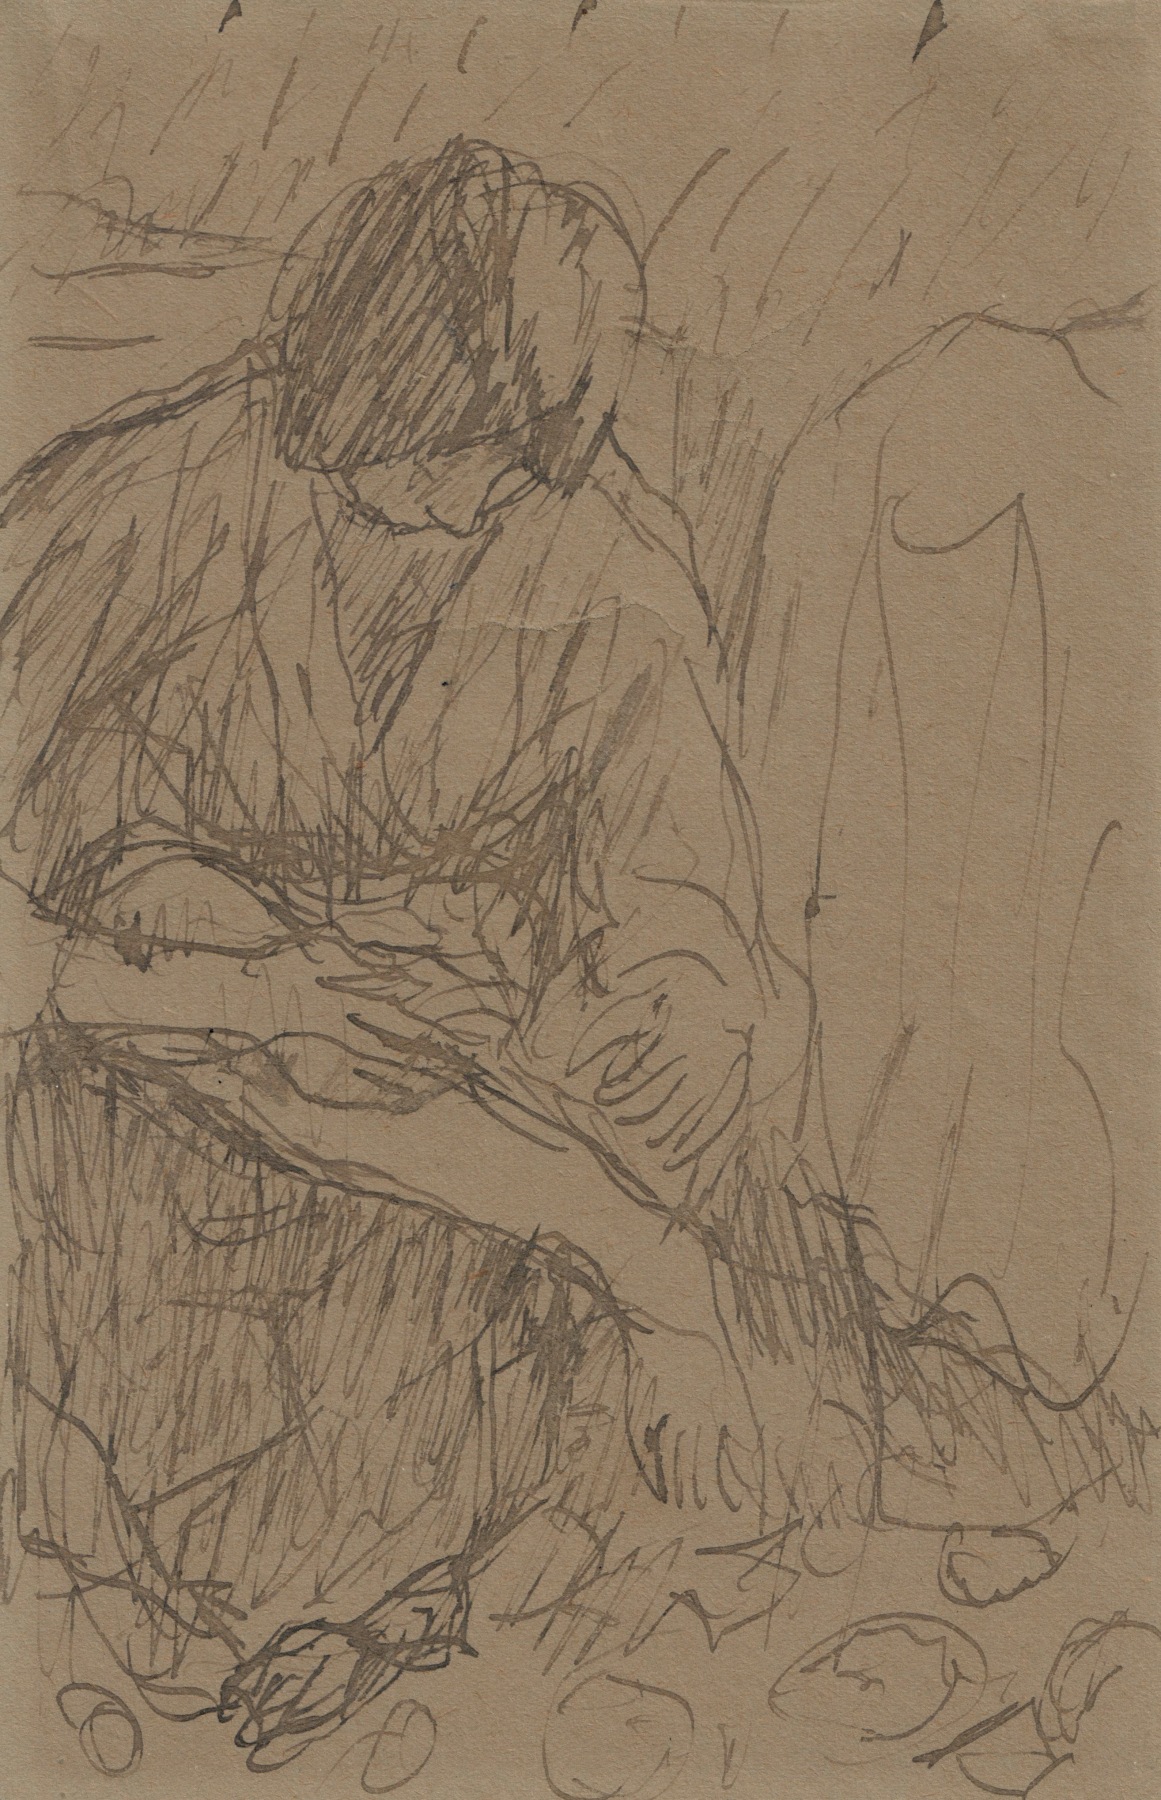 Marthe in a Dressing Gown, c. 1914    Ink on paper 6 1/2 x 4 1/8 inches